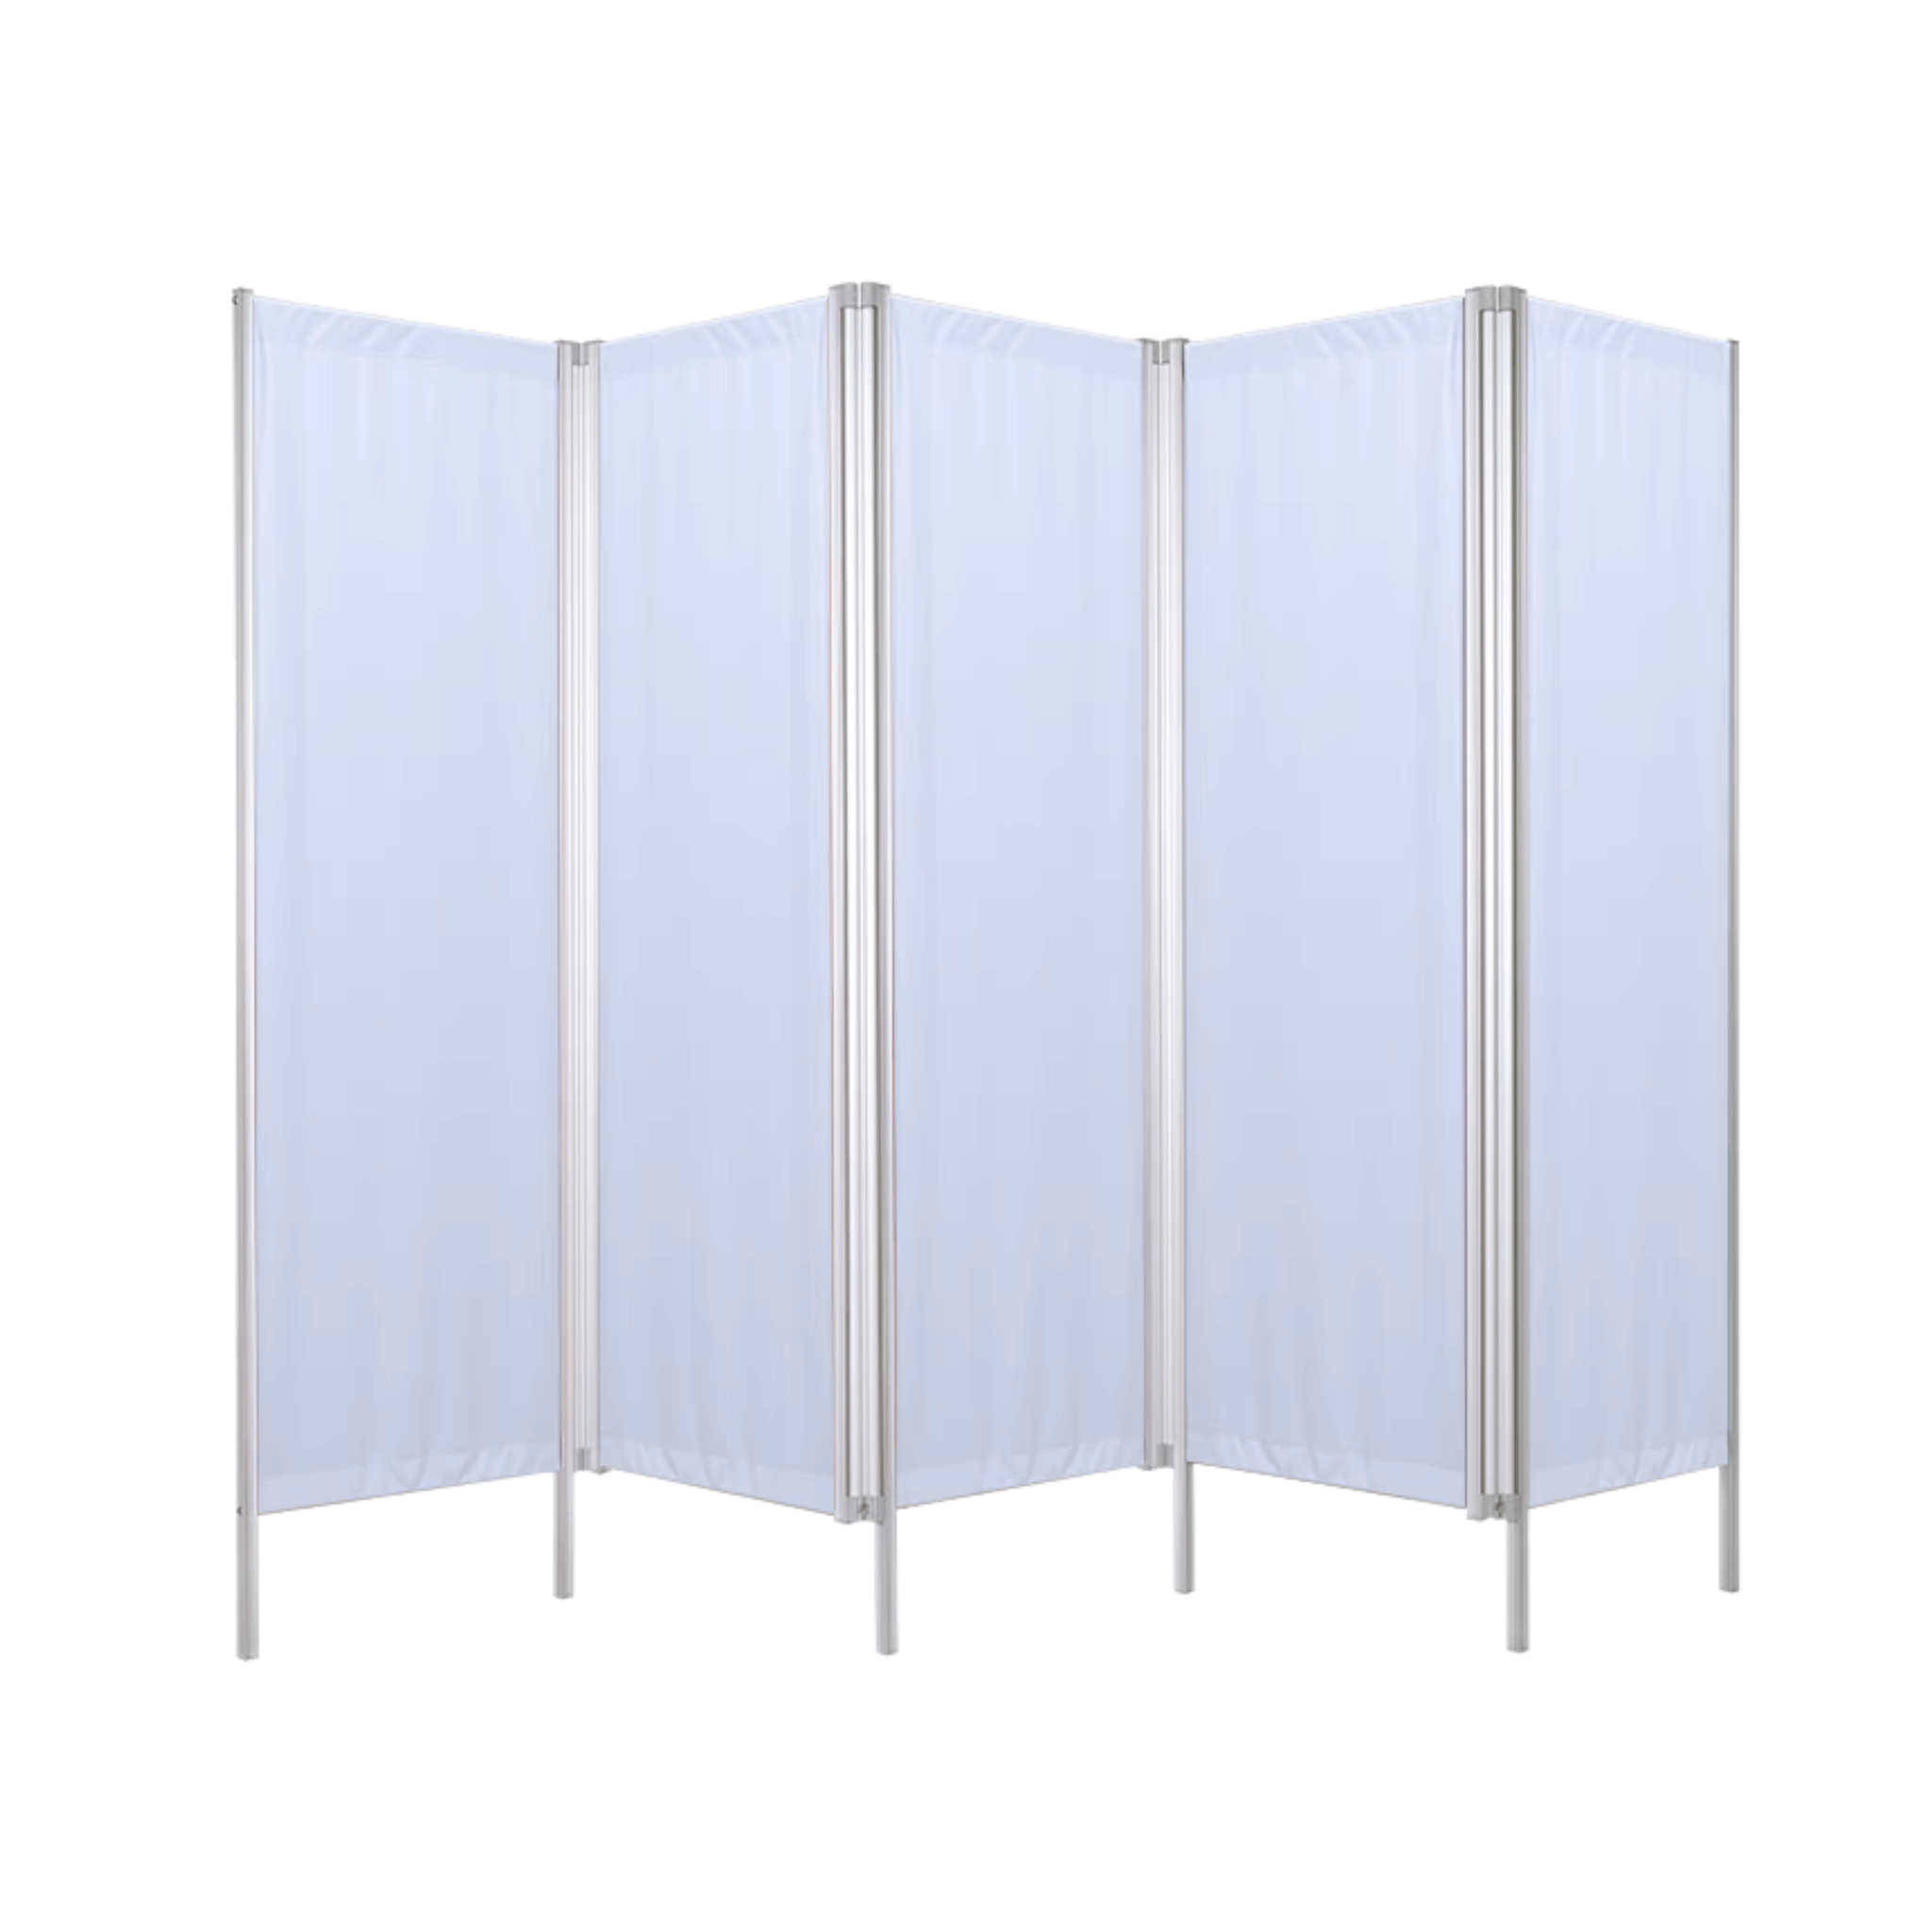 Privacy Screen- Lightweight, Folding, 3 Section, Blue, 165 X 156 cm